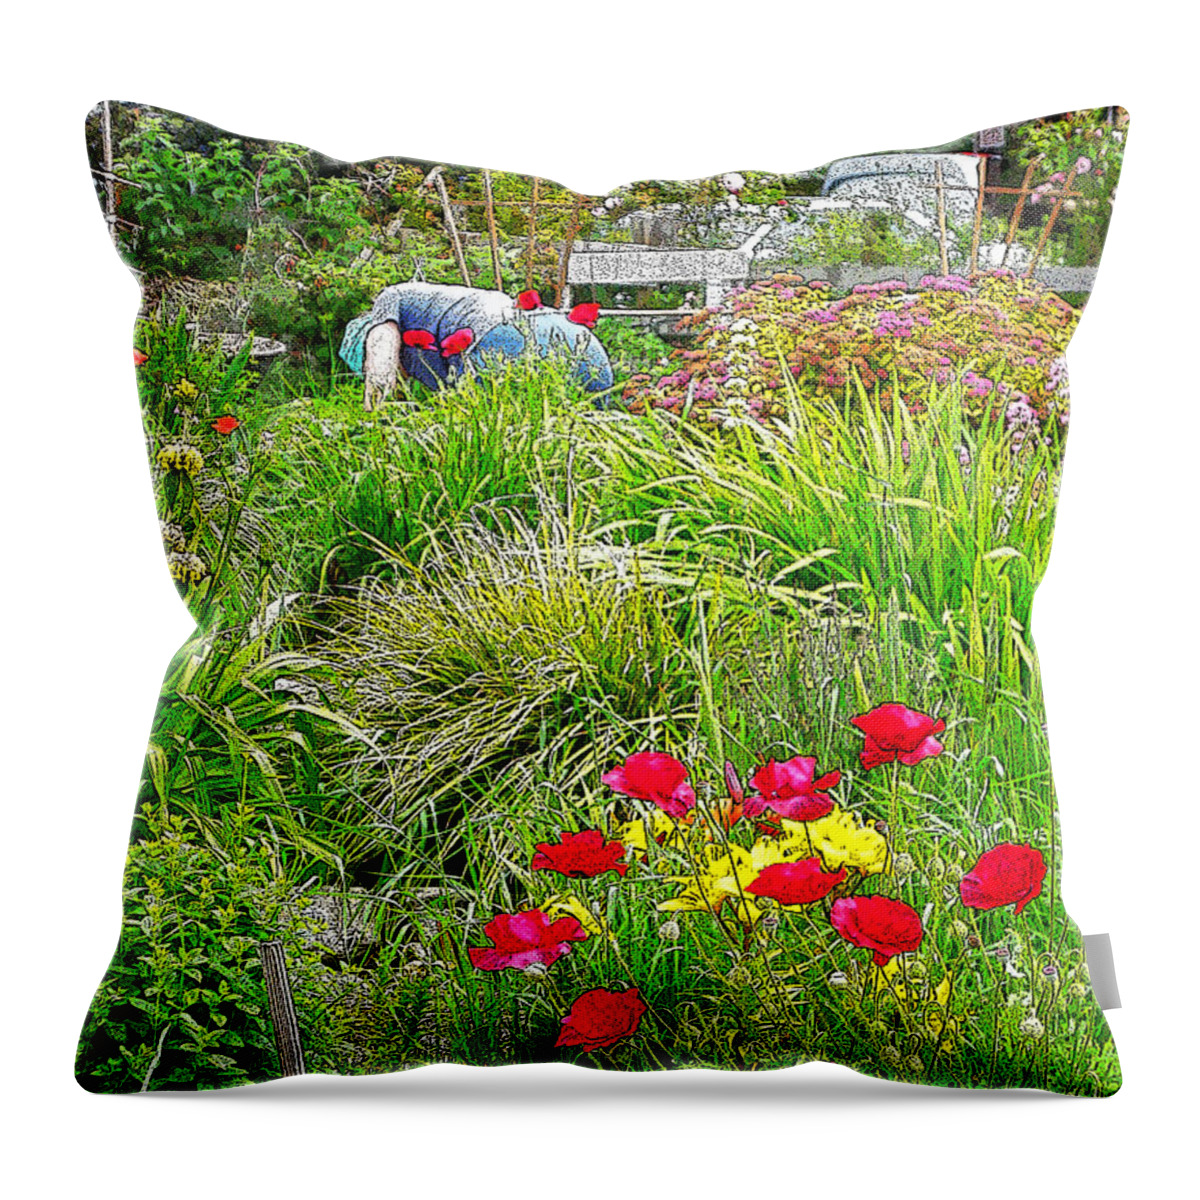 City Throw Pillow featuring the photograph A City Garden by David Trotter